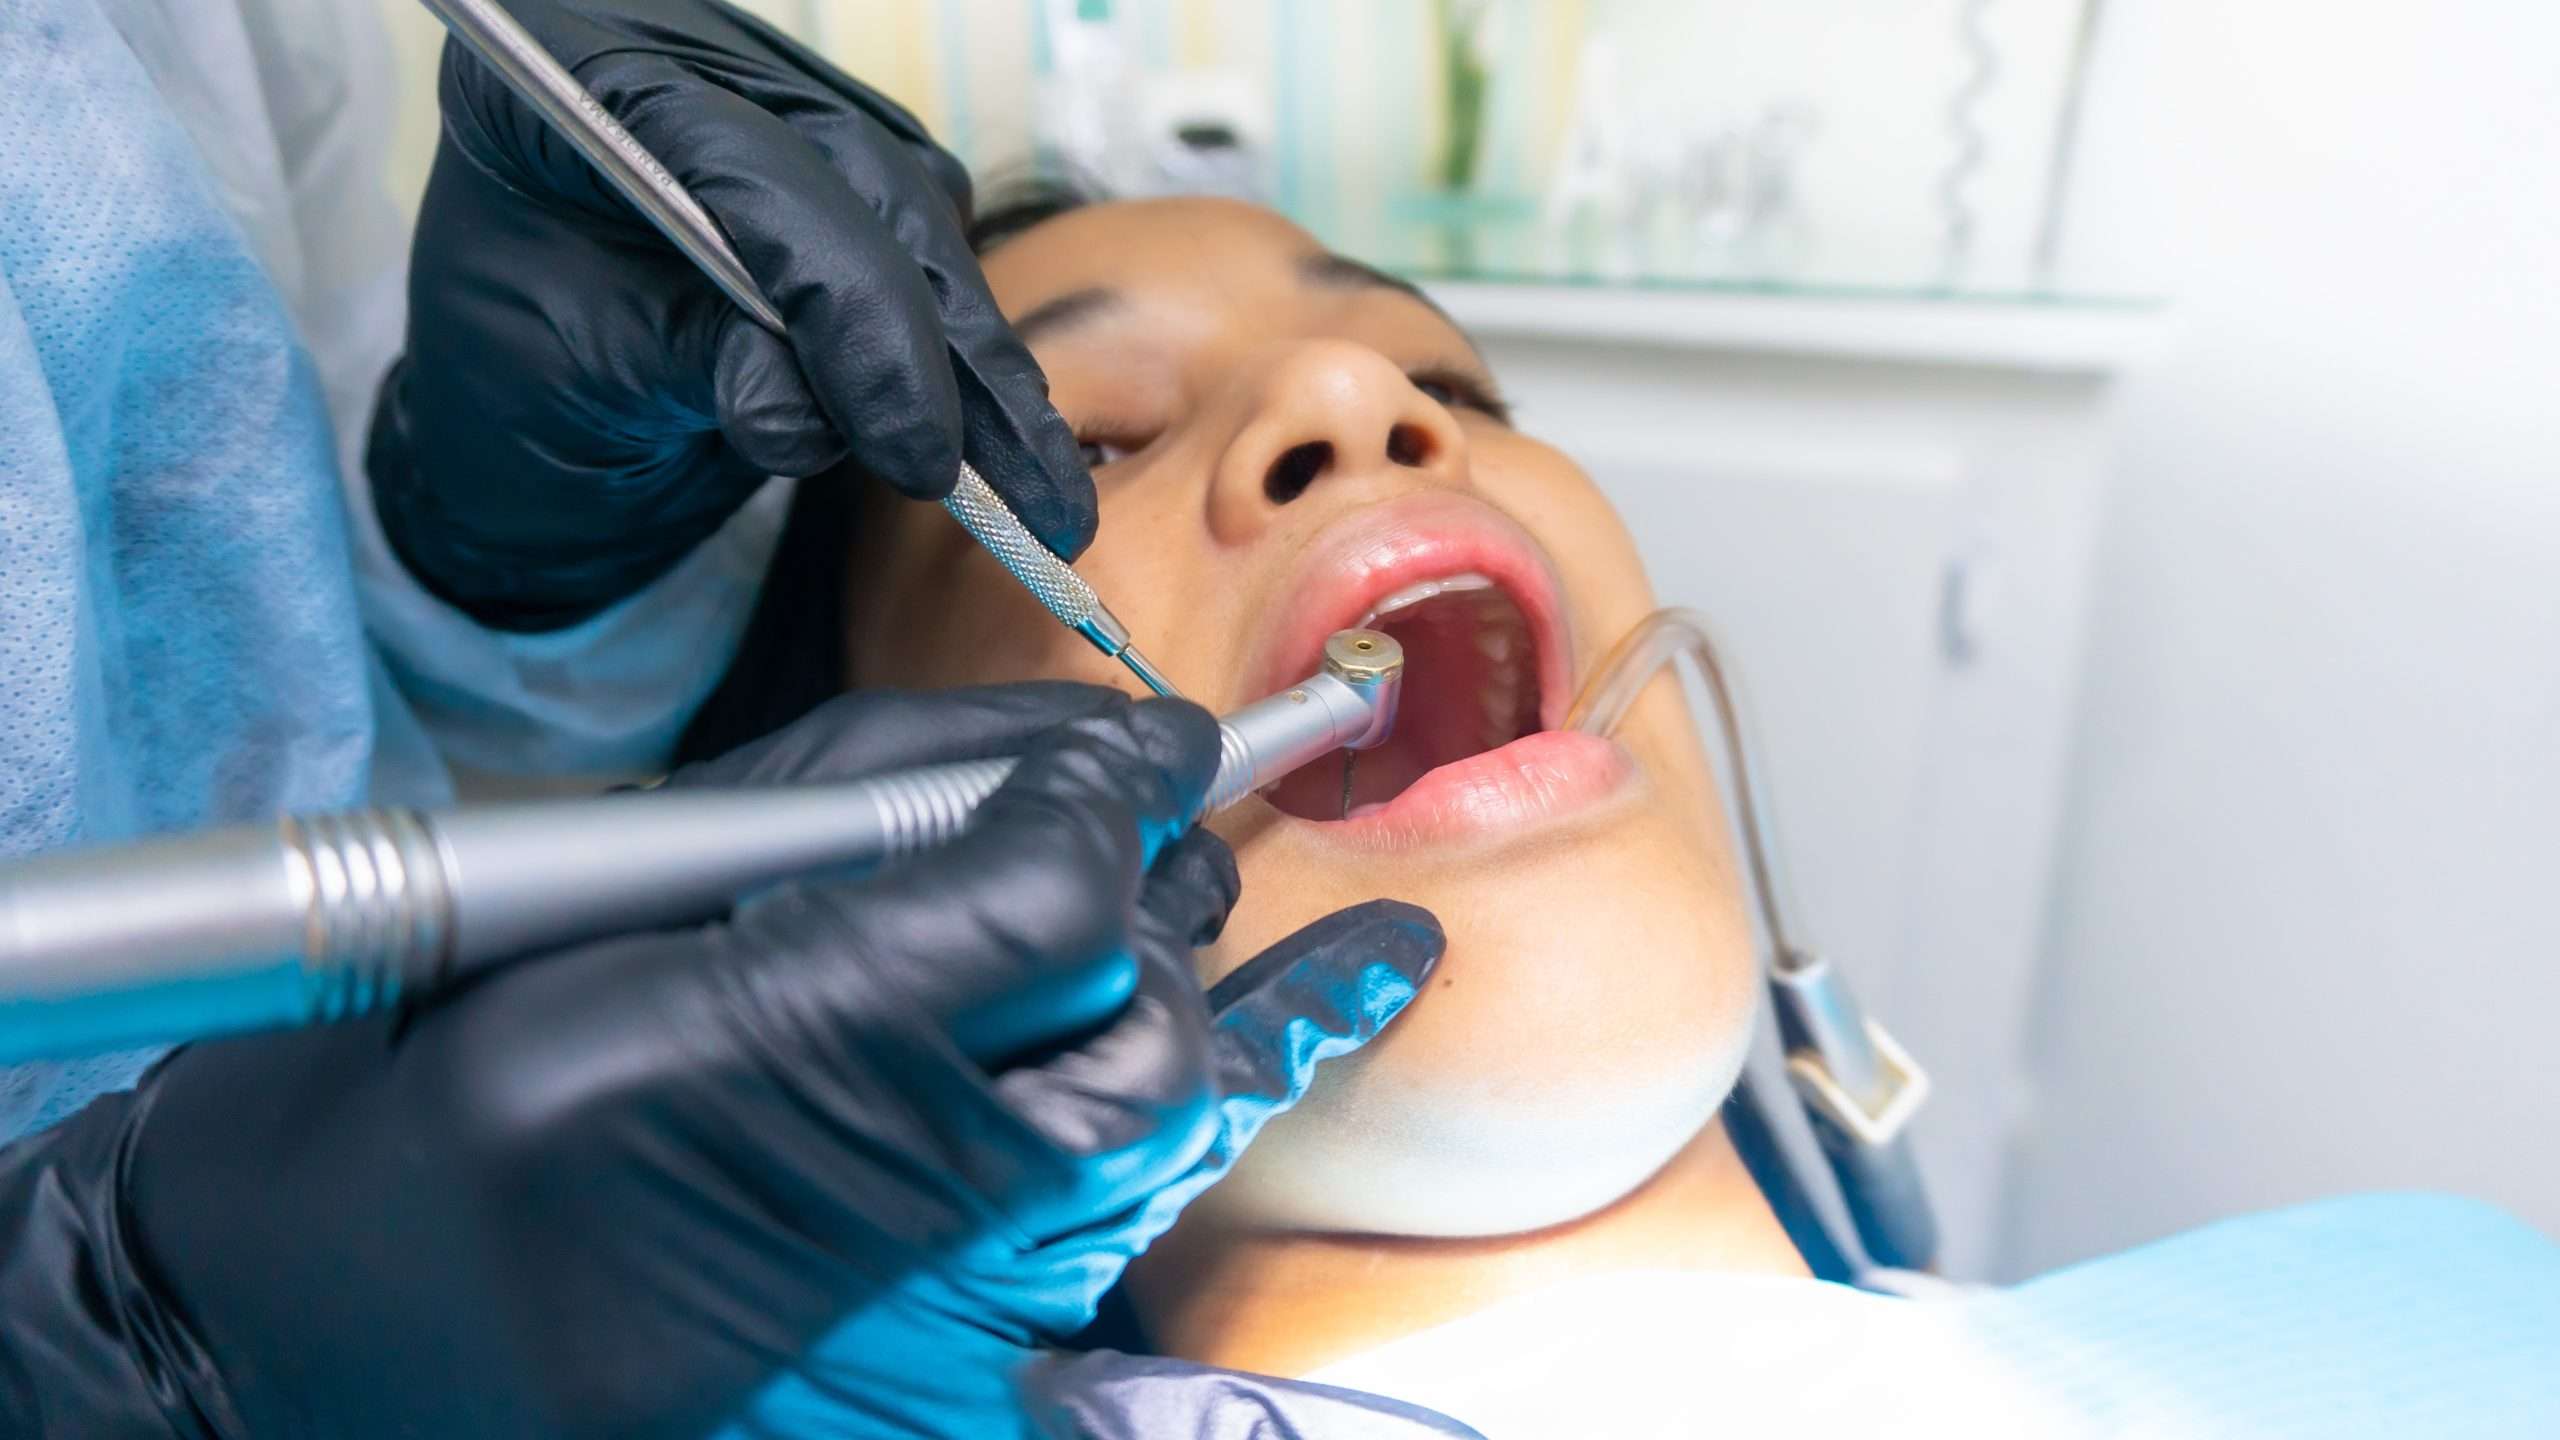 women at the dentist getting her teeth cleaning her teeth